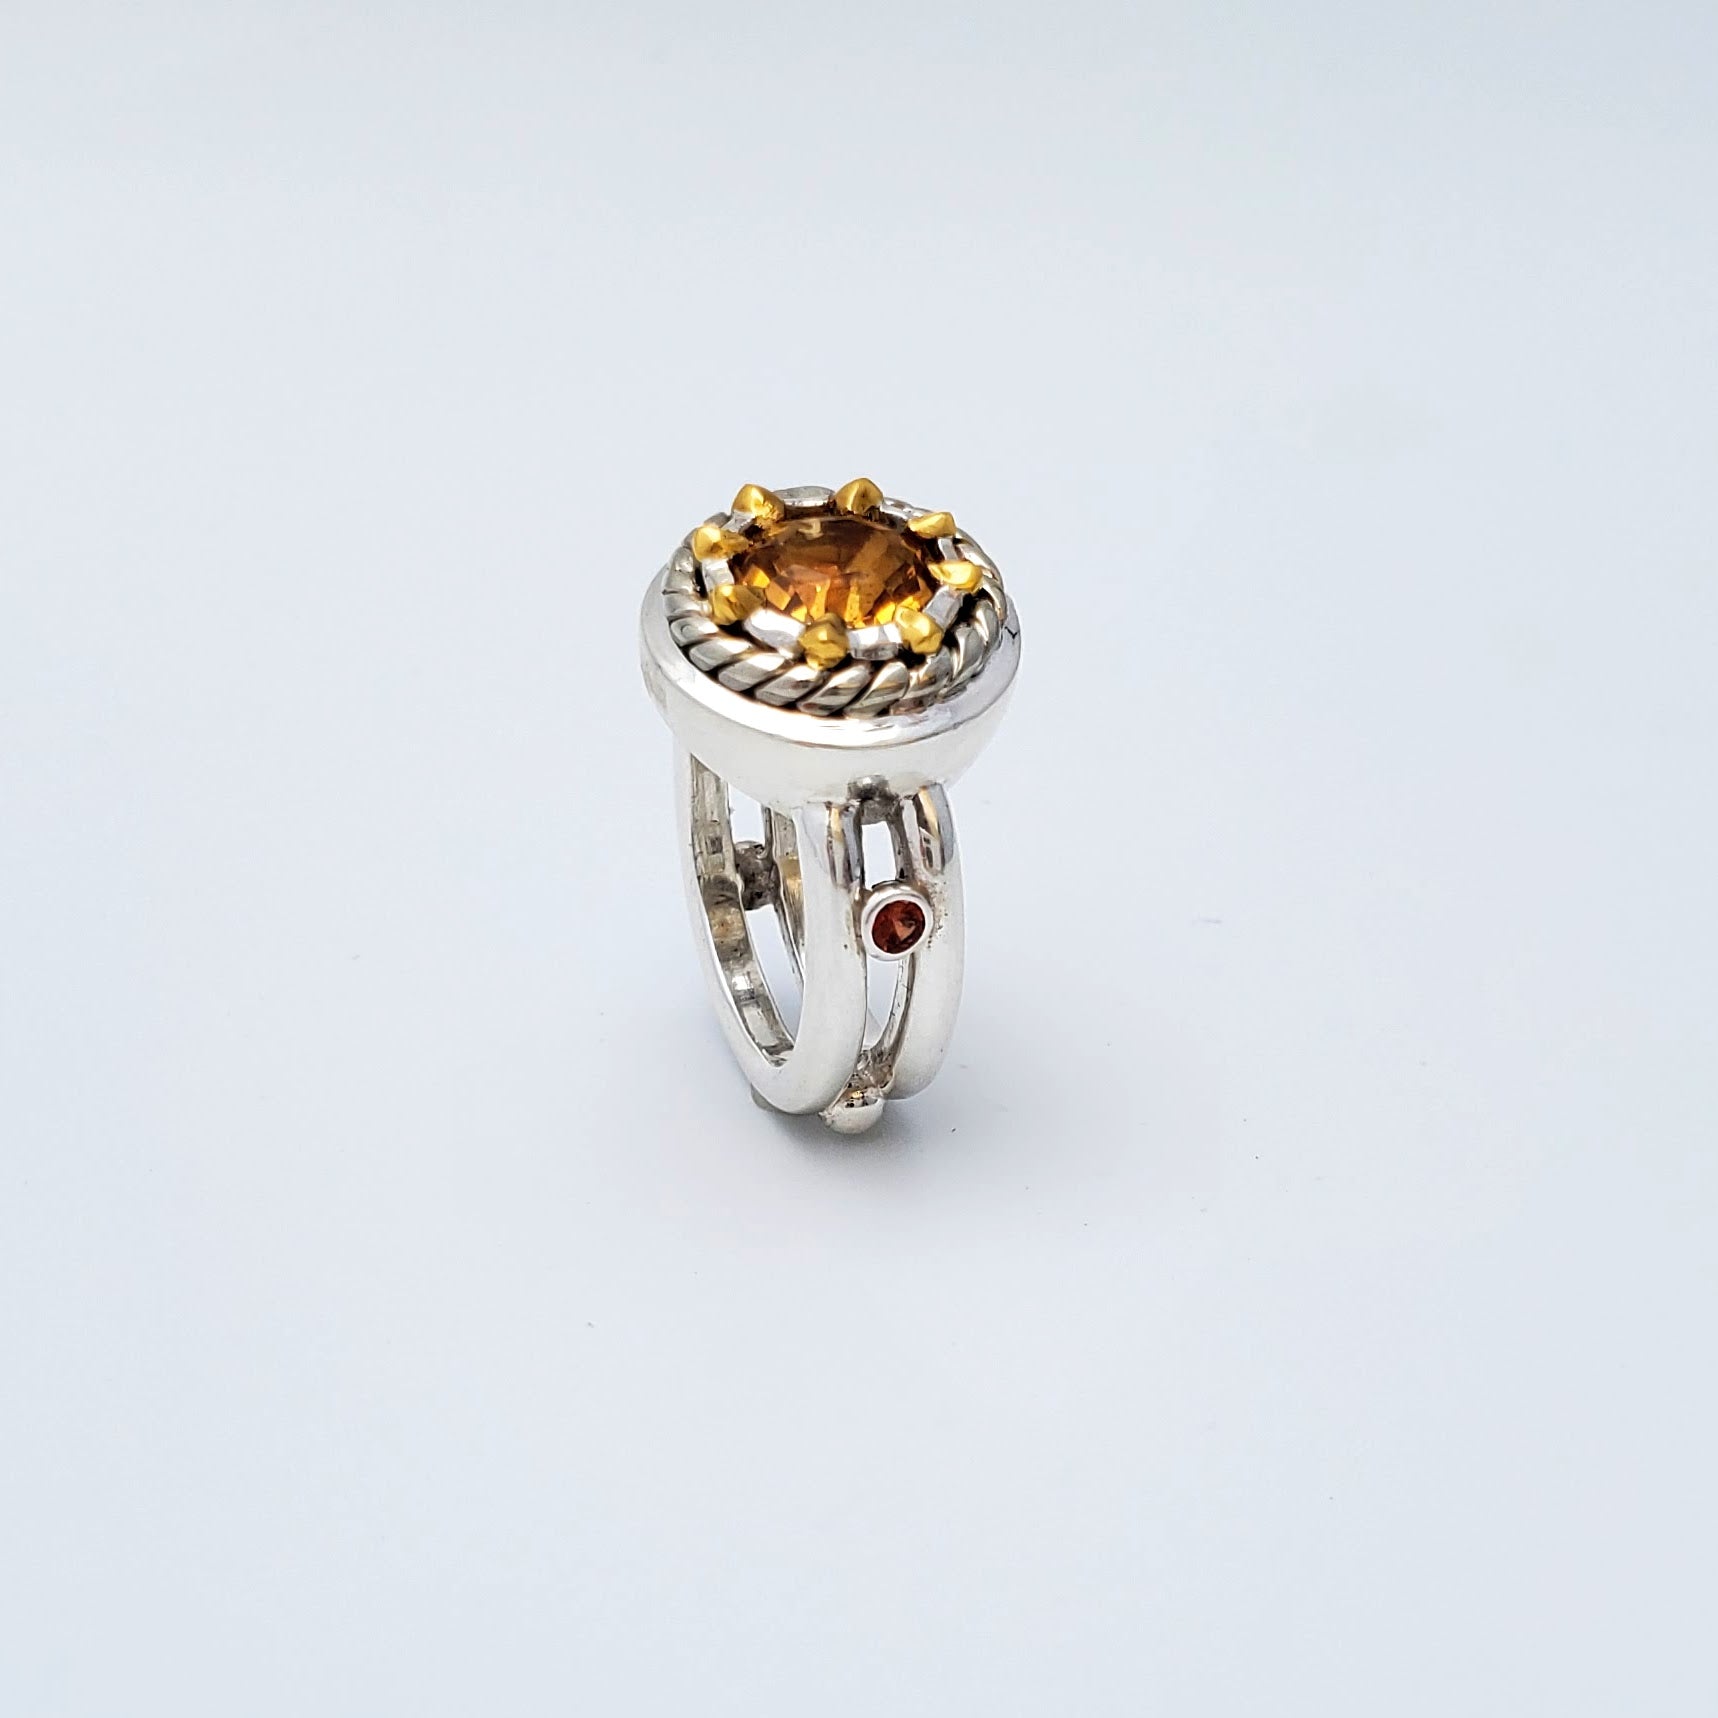 STERLING SILVER & 22KT YELLOW GOLD WITH YELLOW CITRINE & POMEGRANATE SAPPHIRES